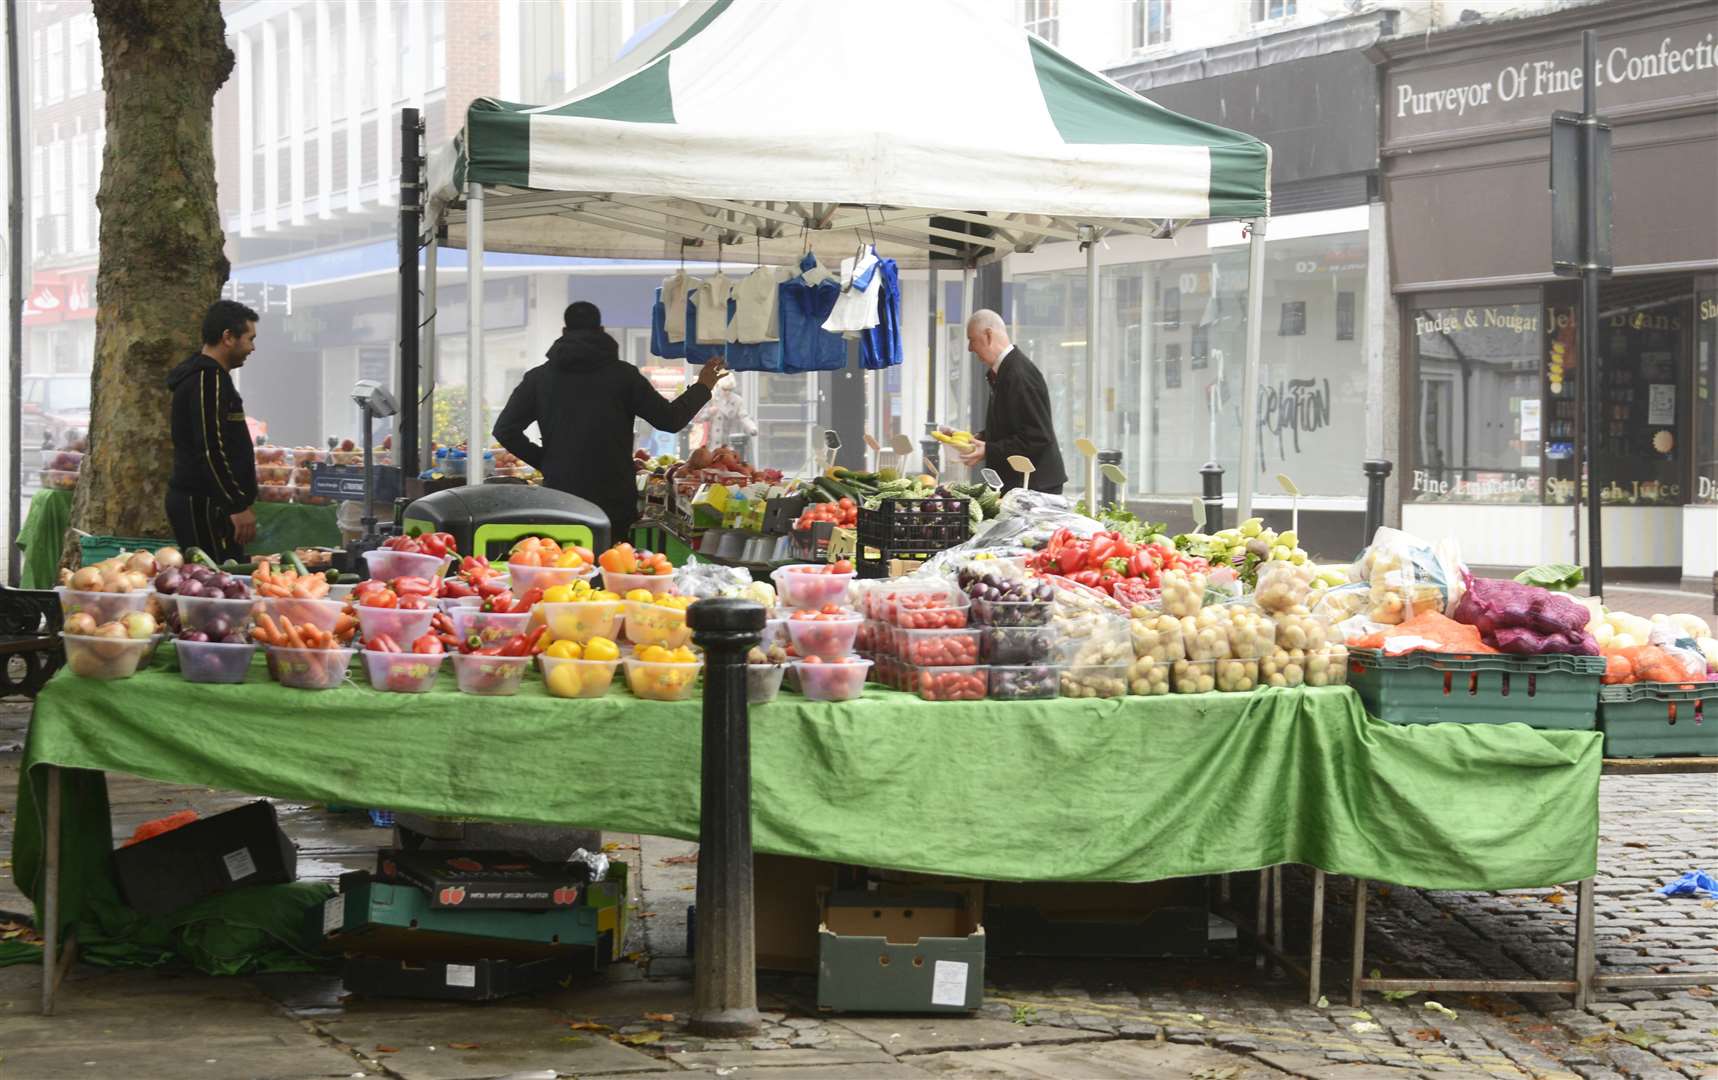 Stallholders want to move back to the upper high street. Picture: Paul Amos